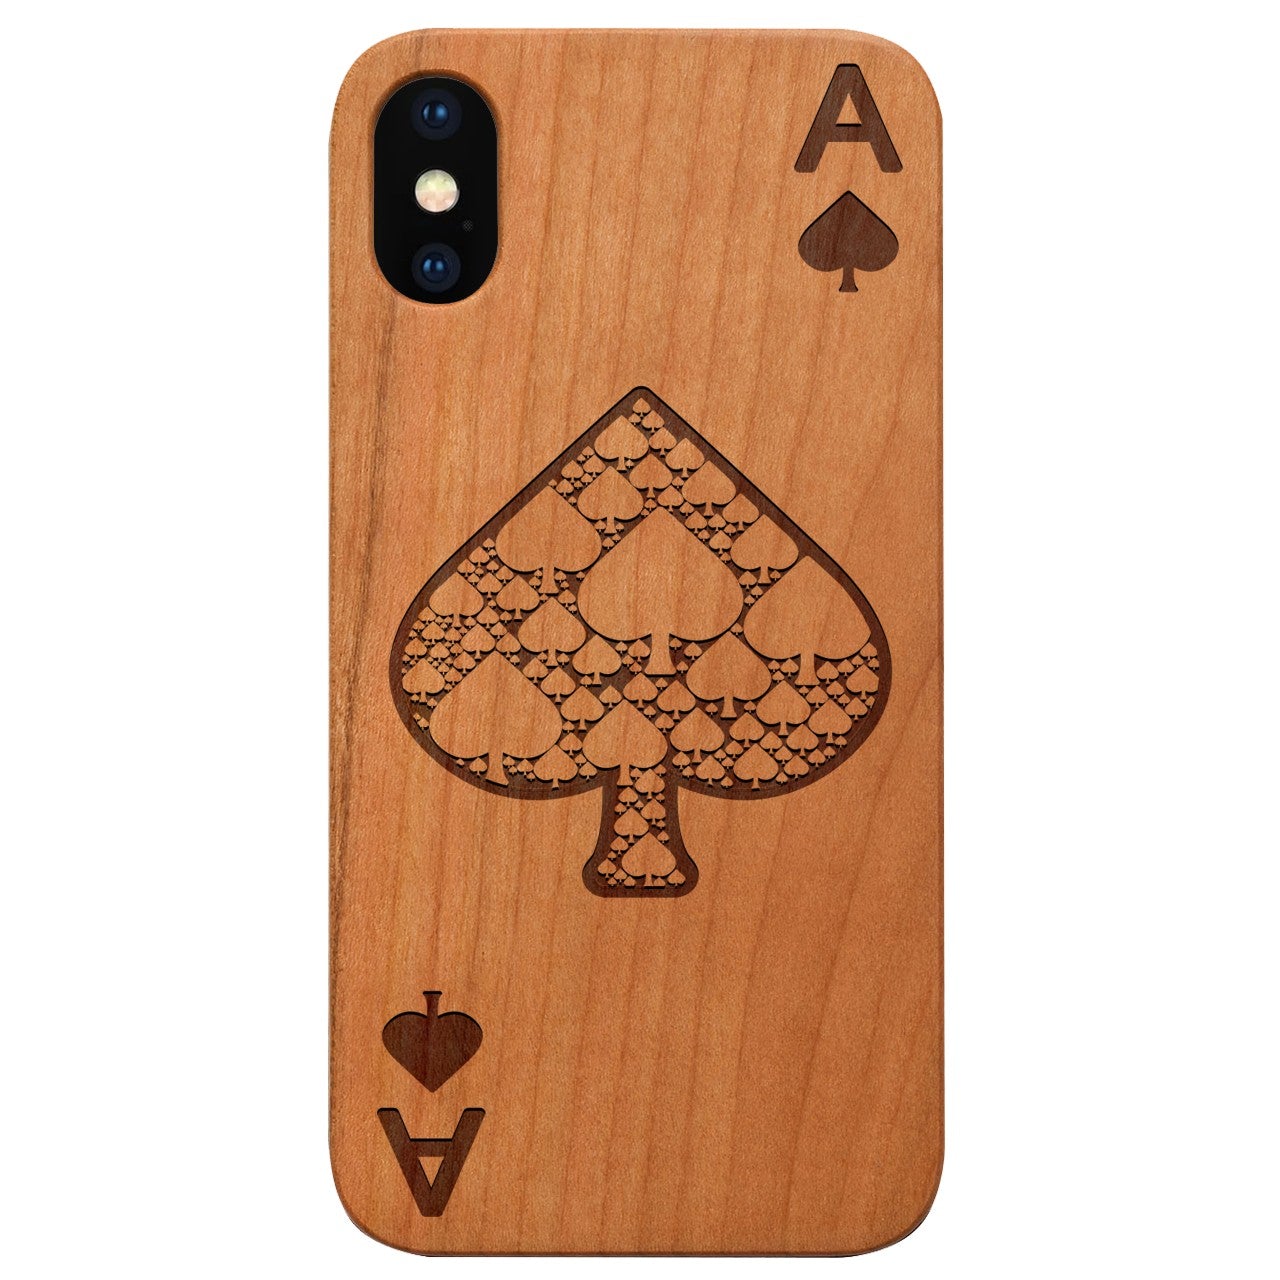  Ace of Spades - Engraved - Wooden Phone Case - IPhone 13 Models